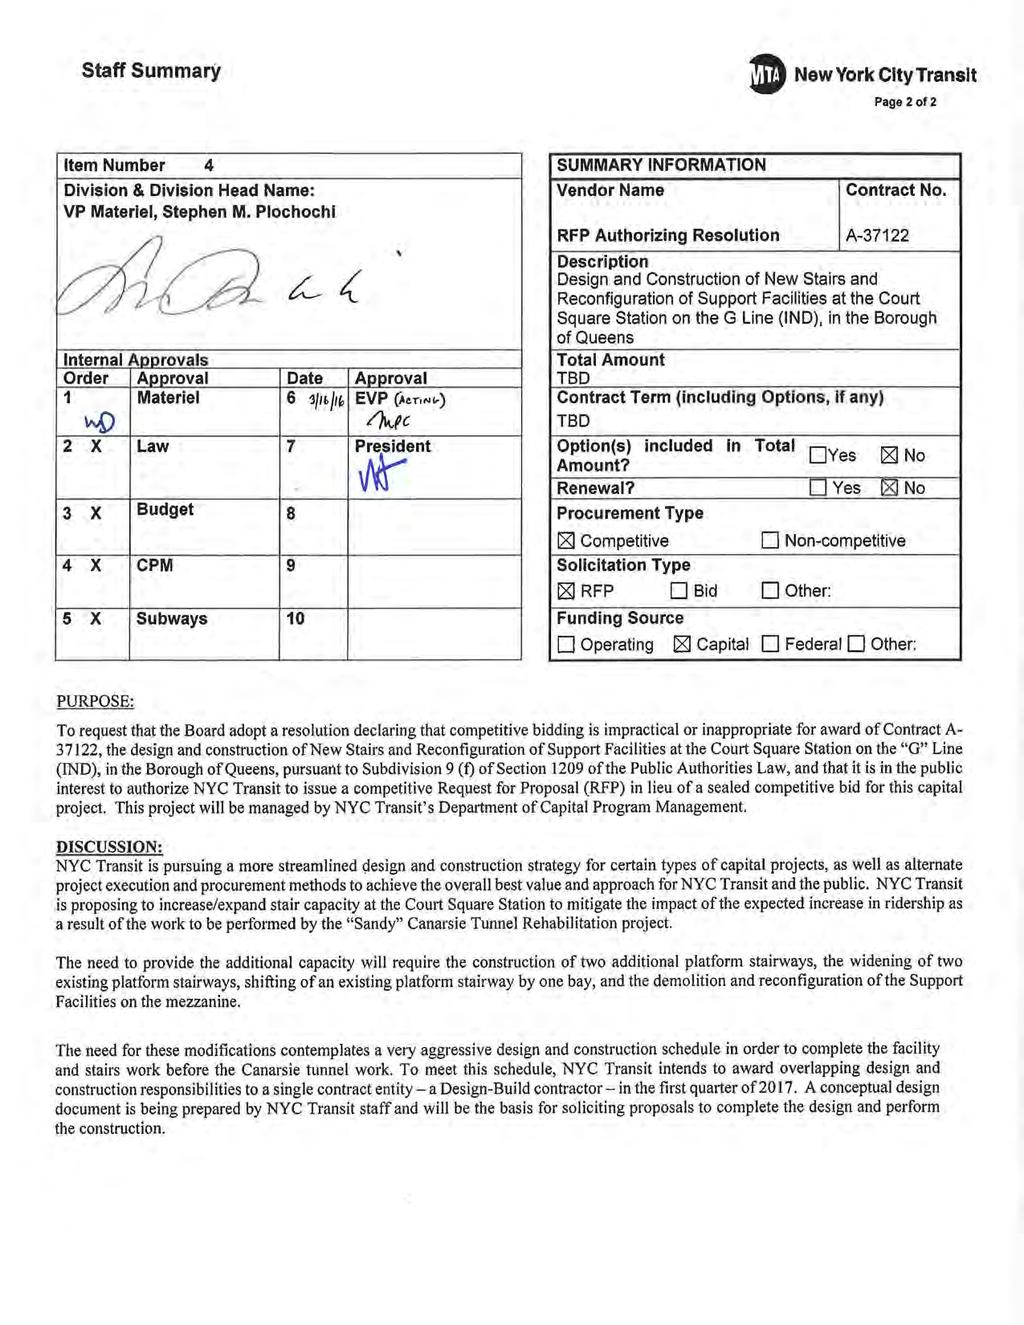 Staff Summary 8 NewYorkCltyTranslt Page 2 of 2 Item Number 4 Division & Division Head Name: VP Materiel, Stephen M.